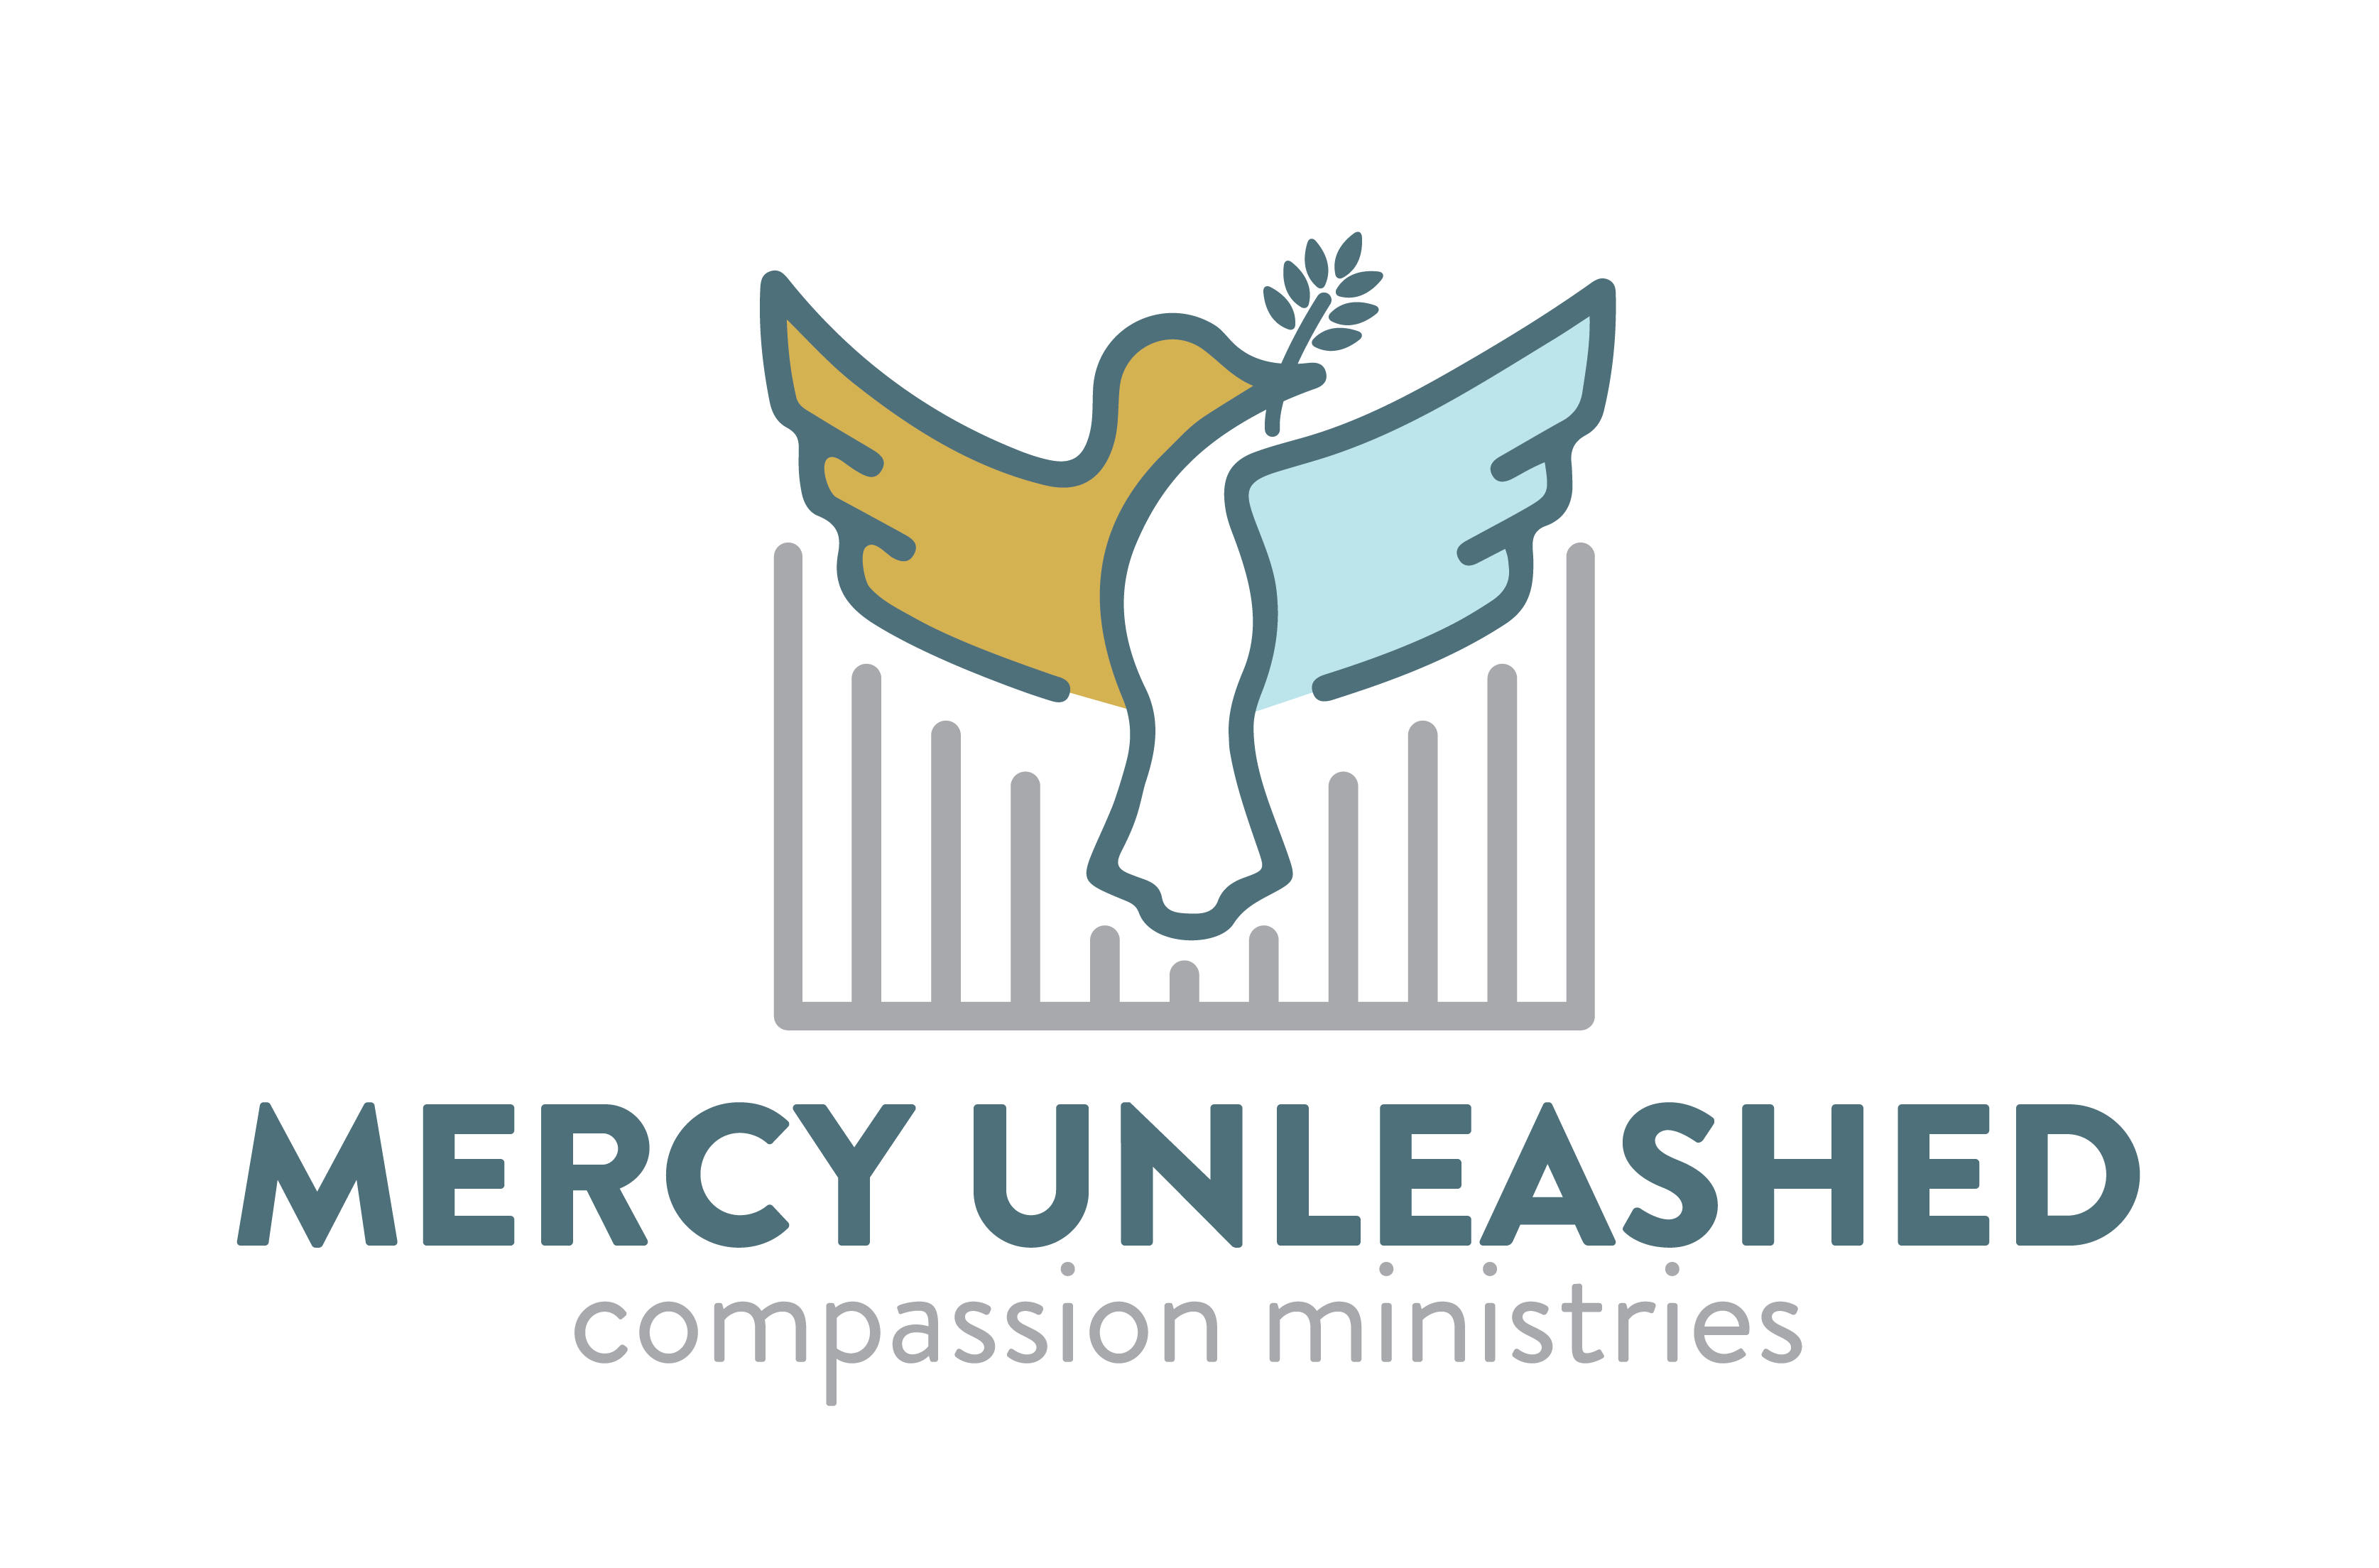 Mercy Unleashed Compassion Ministries, Inc. logo